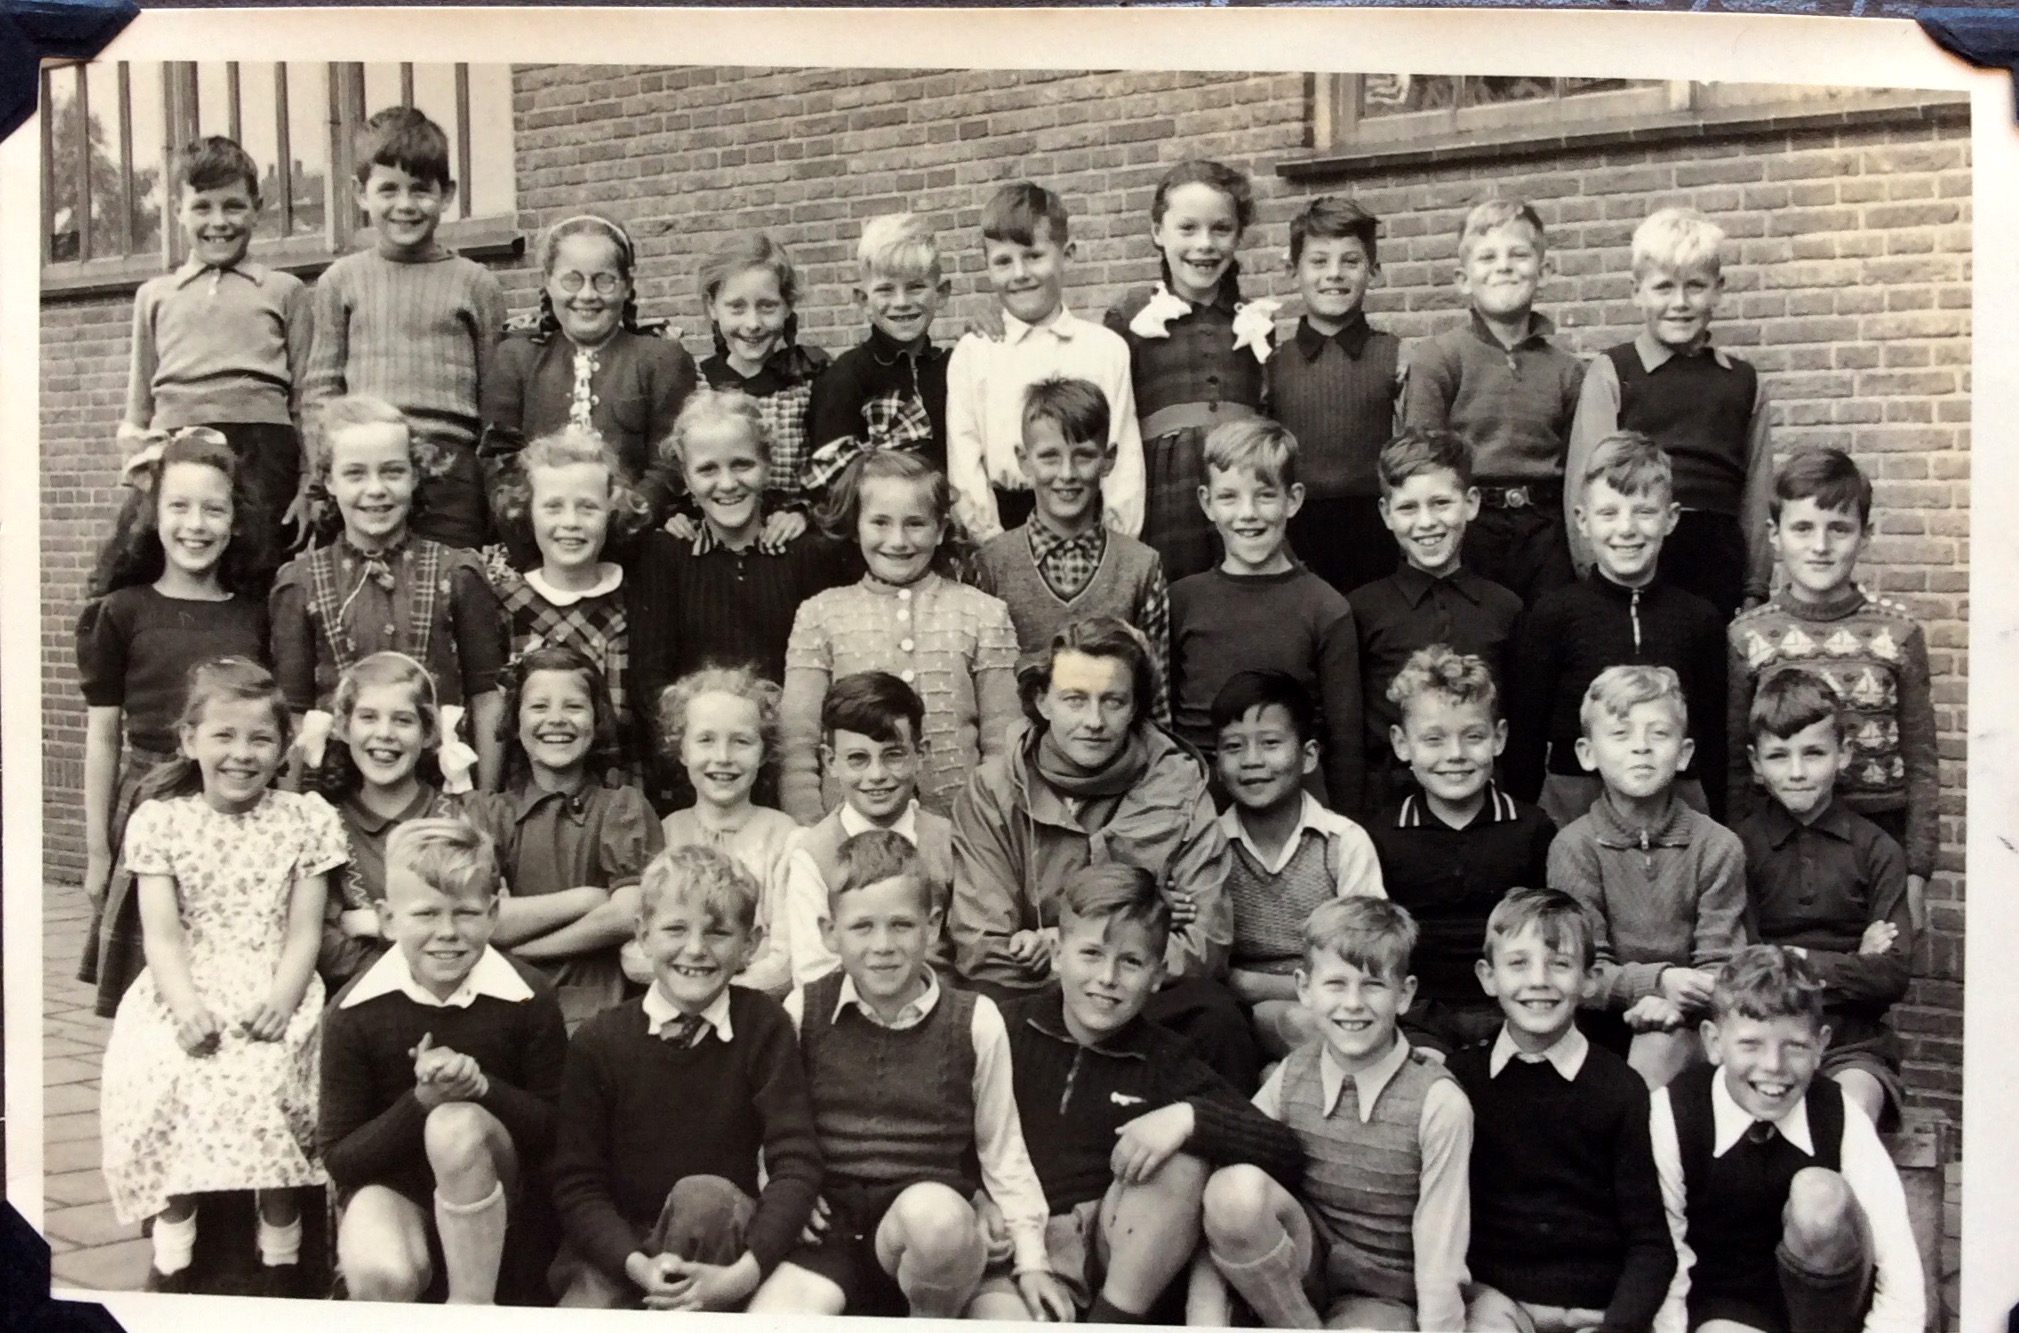 School in Leiden, Holland 1949 - 3rd class- me 2nd row from top, 2nd from the left...